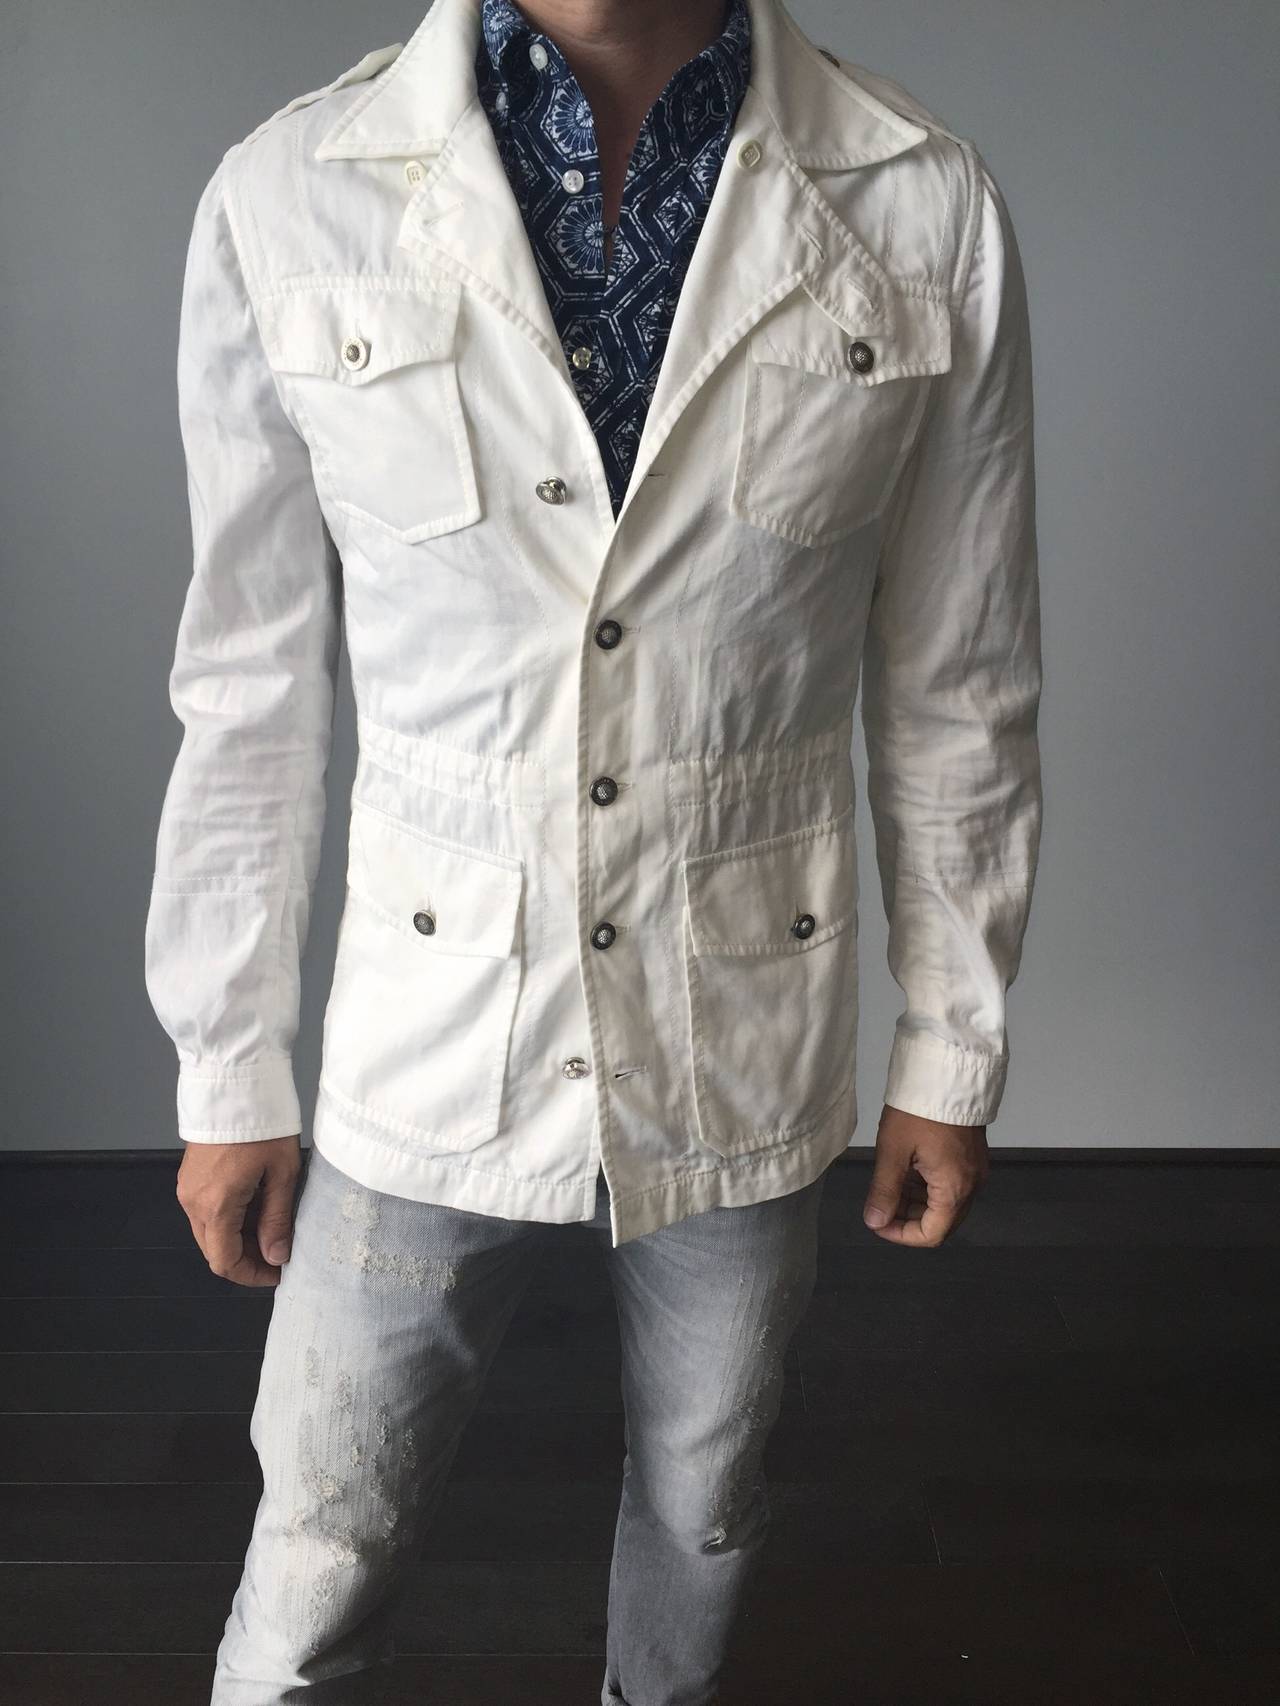 Awesome Balenciaga by Nicolas Ghesquiere men's white safari jacket! Features silver signature buttons up front,with marching buttons at pockets, and at cuffs. Interior draawstring at waist to ensure a great slim fit! Lightweight cotton. In great